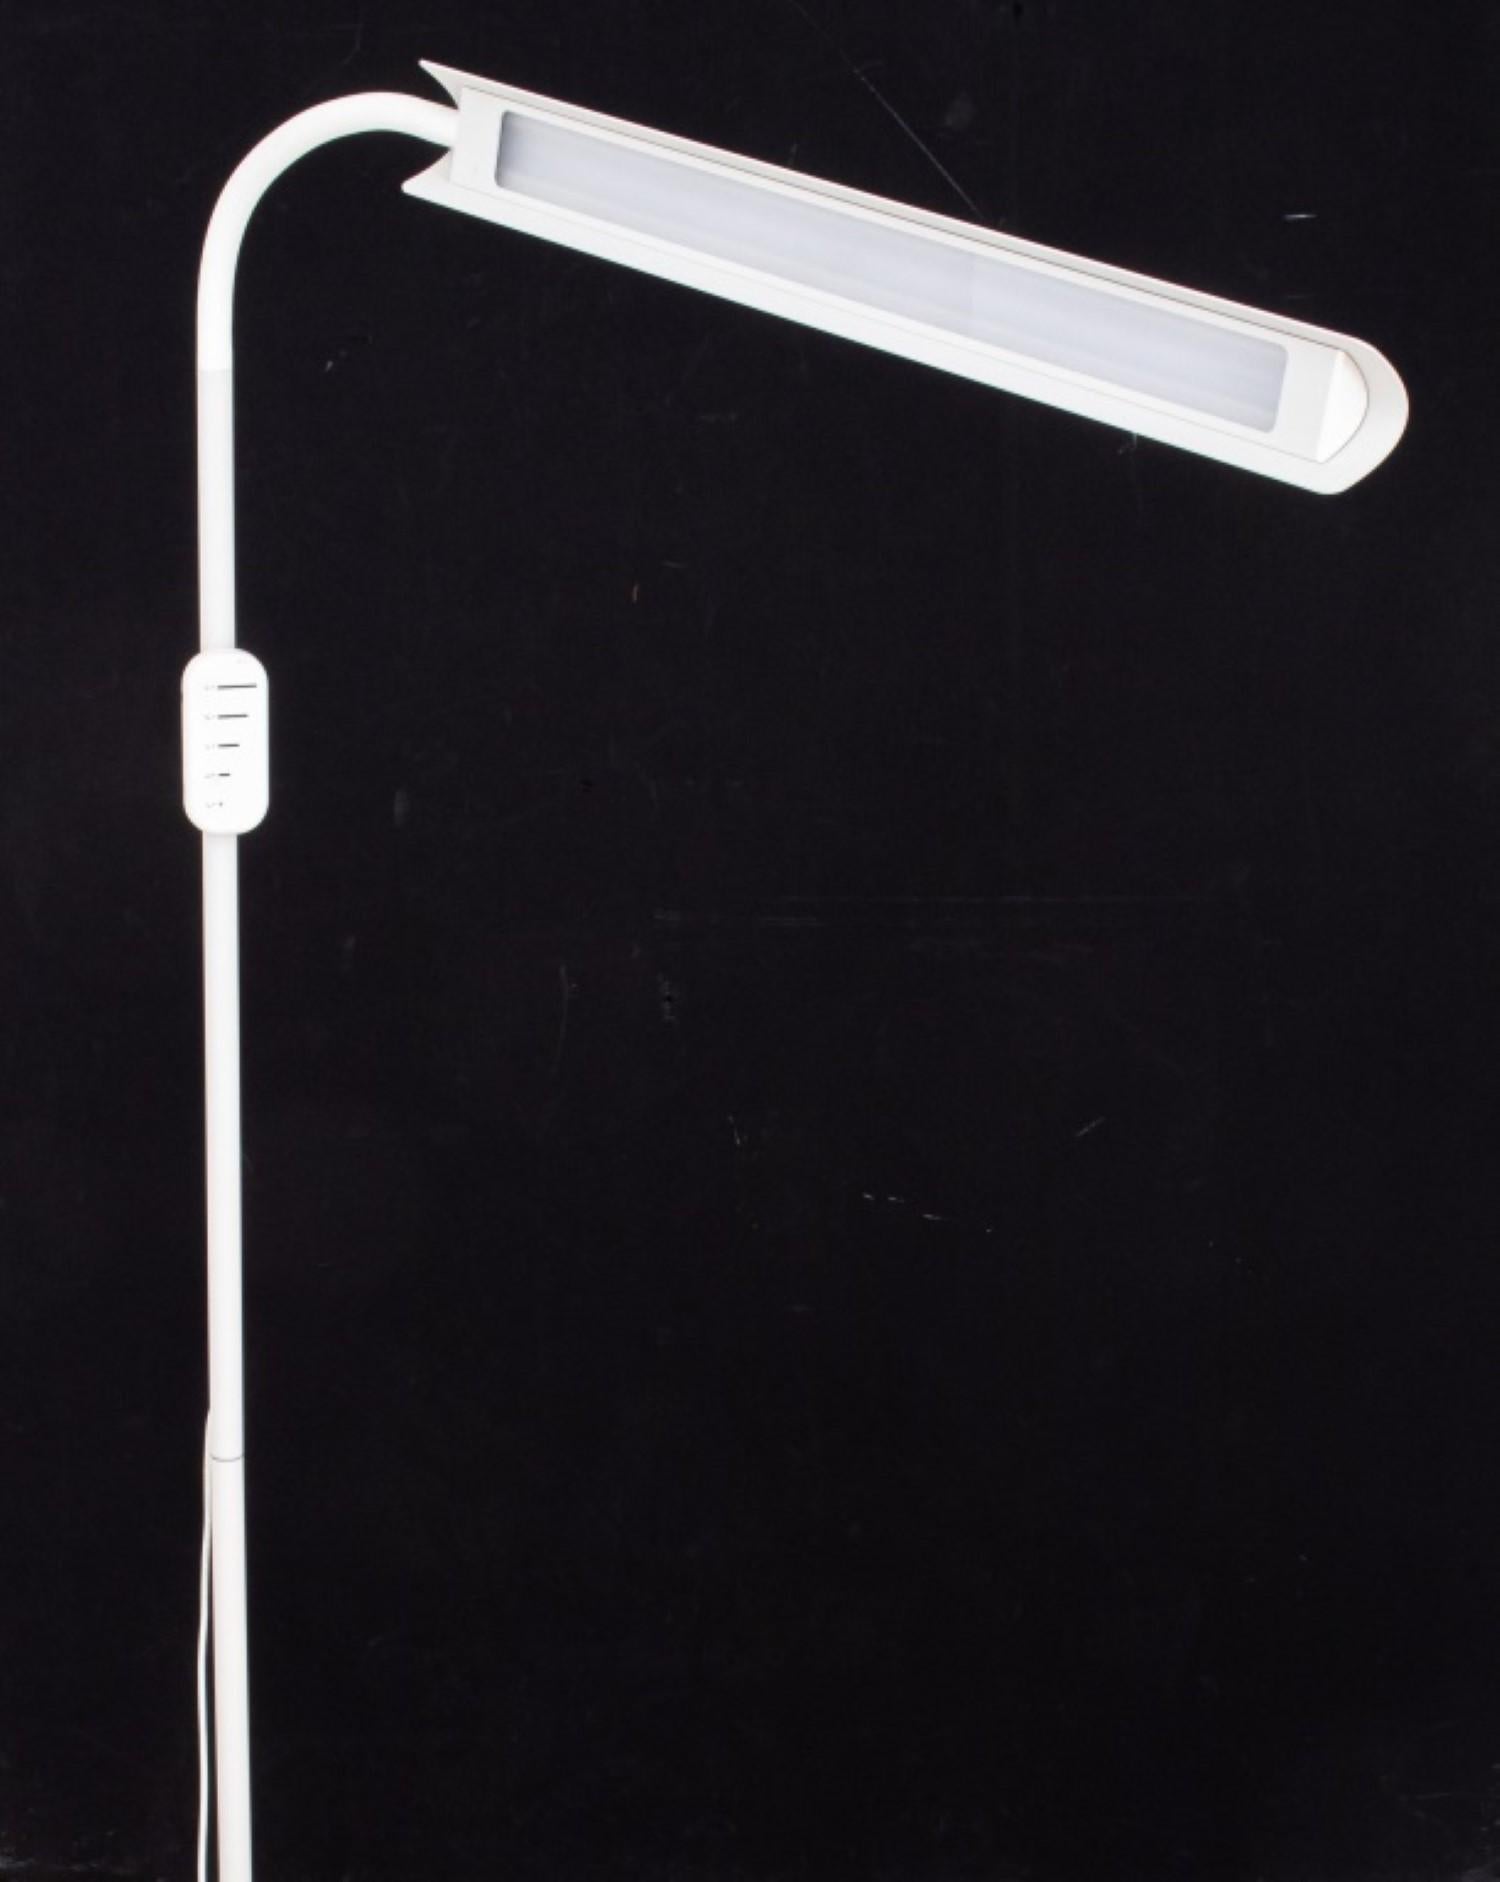 The dimensions for the Solyte XL white mat lacquered metal adjustable reading floor lamp are as follows:

Lamp: 55.5